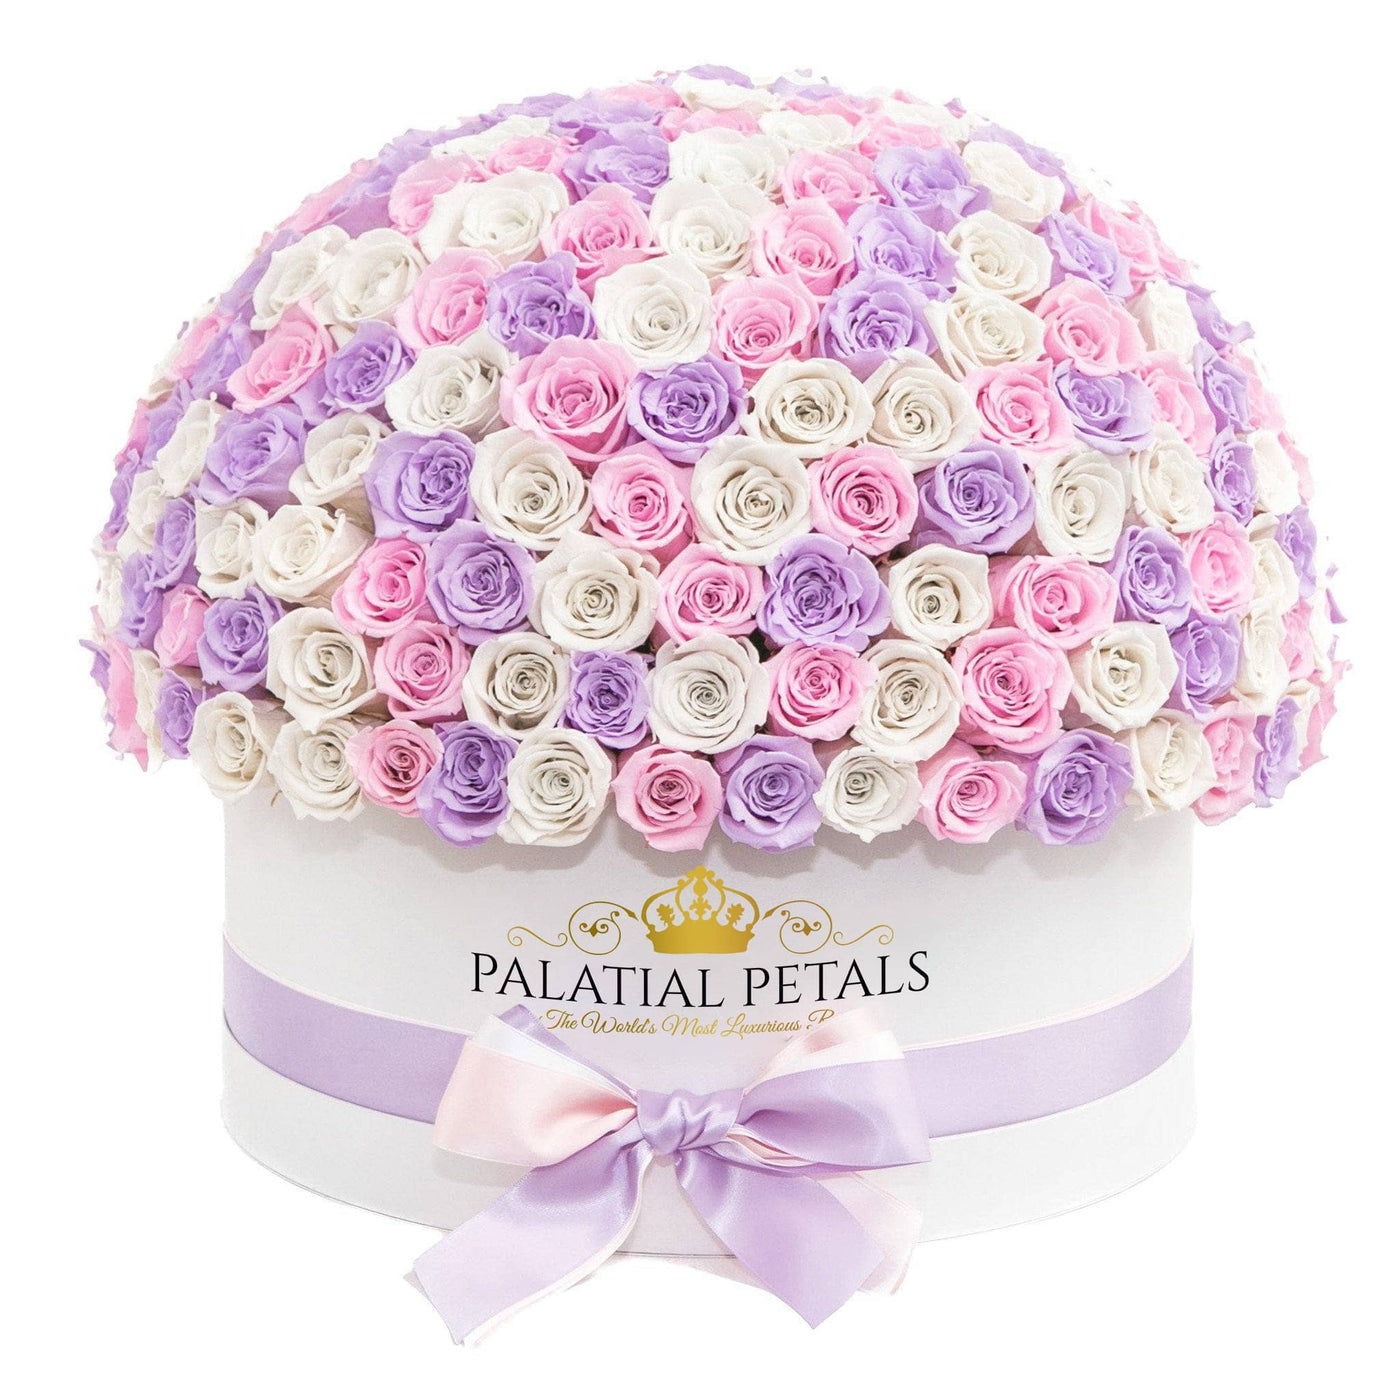 Princess Roses That Last A Year (Dome) - Deluxe Rose Box